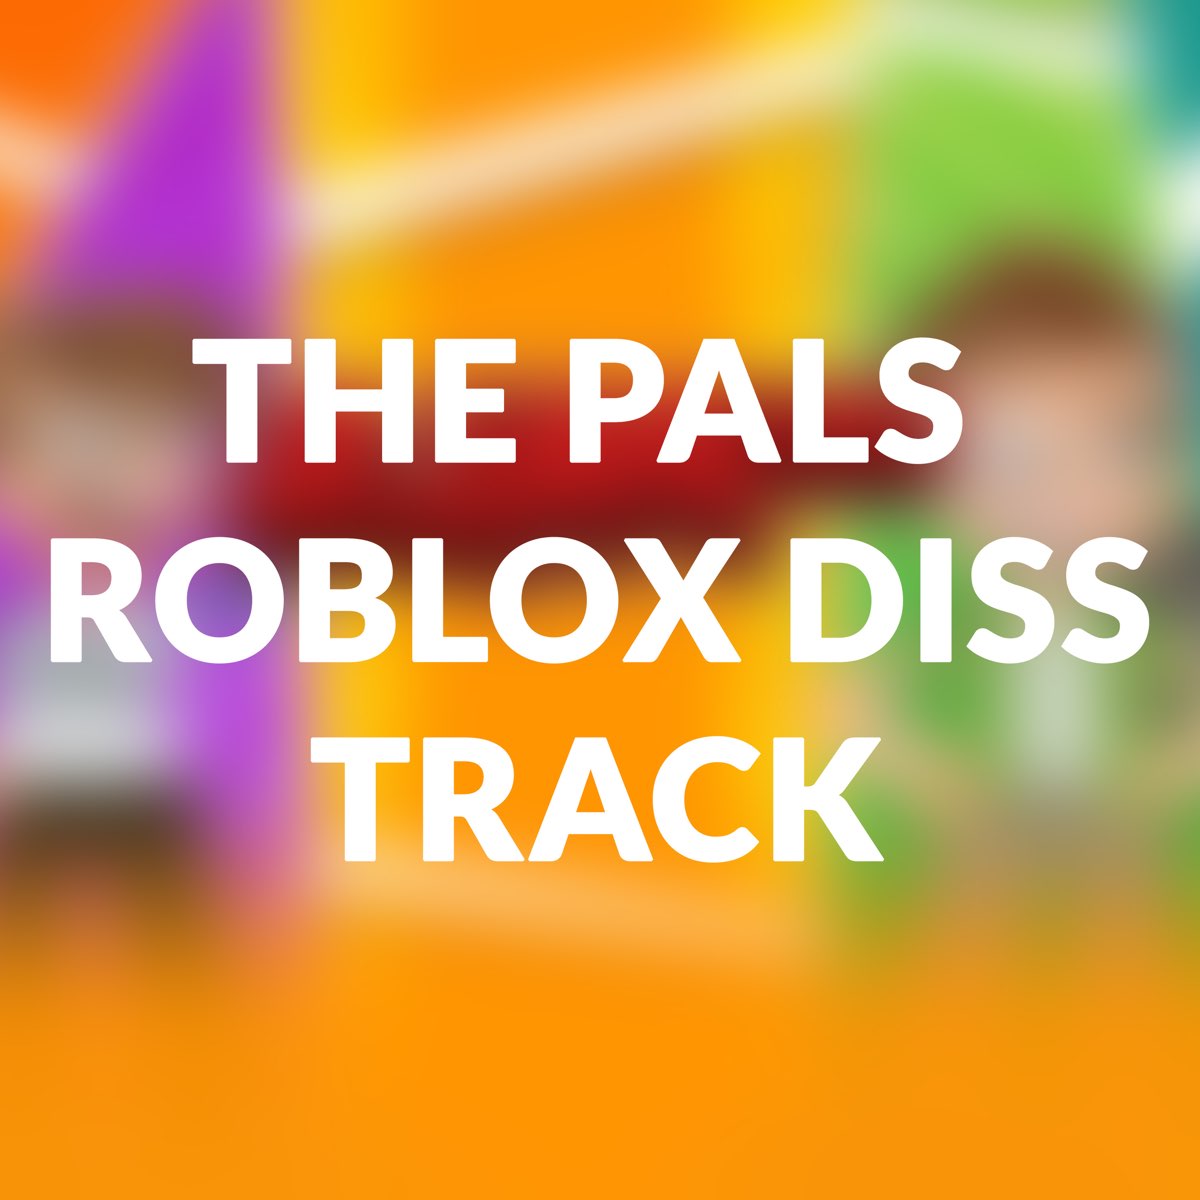 Roblox Pro Single By Iceboy Ben On Apple Music - roblox diss track